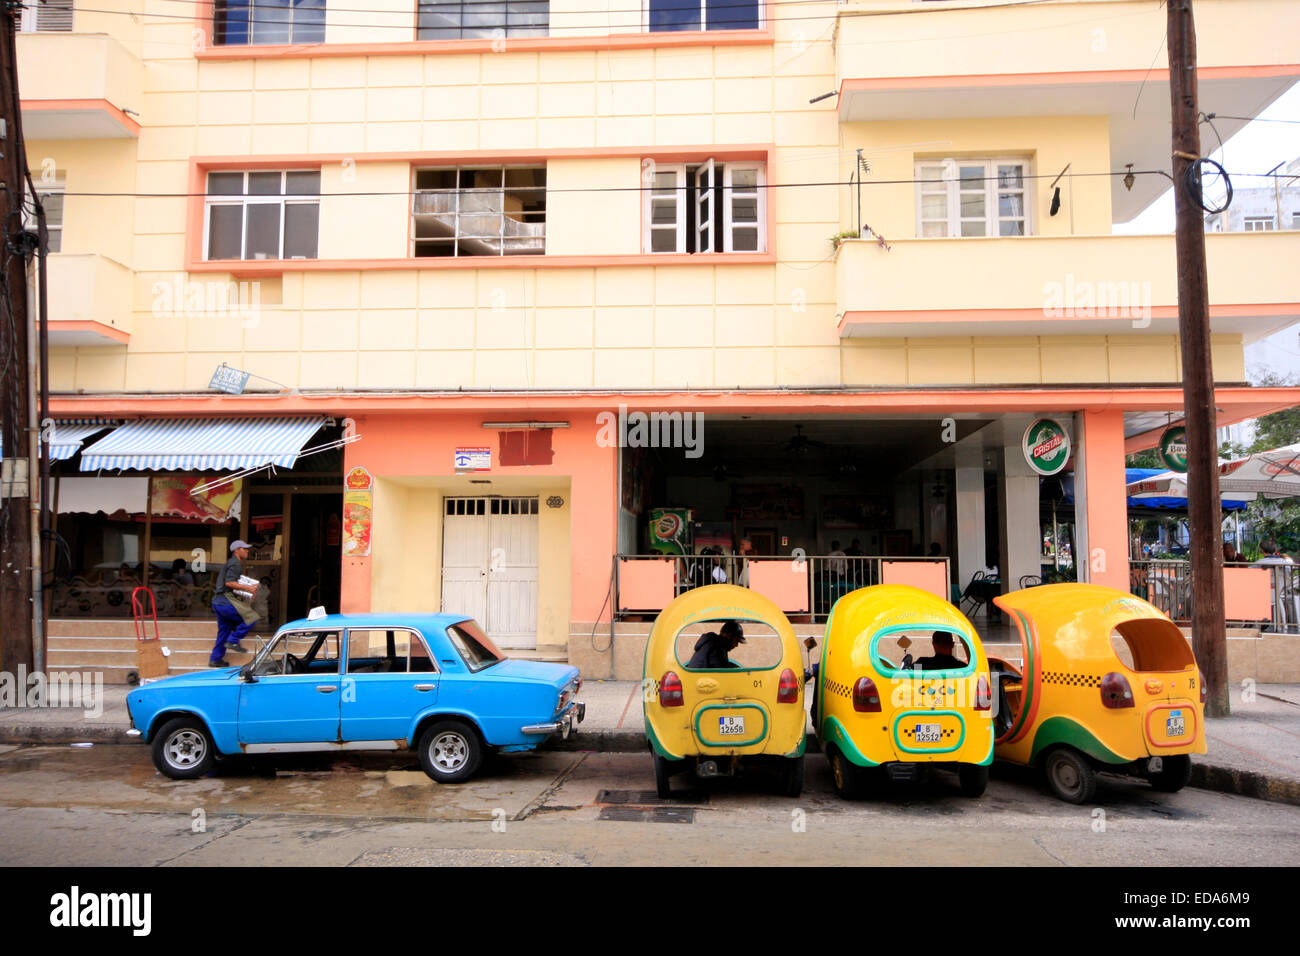 Old and new in Havana - A Russian made Lada parked next to Coco Taxis in a street in the Cuban capital Stock Photo